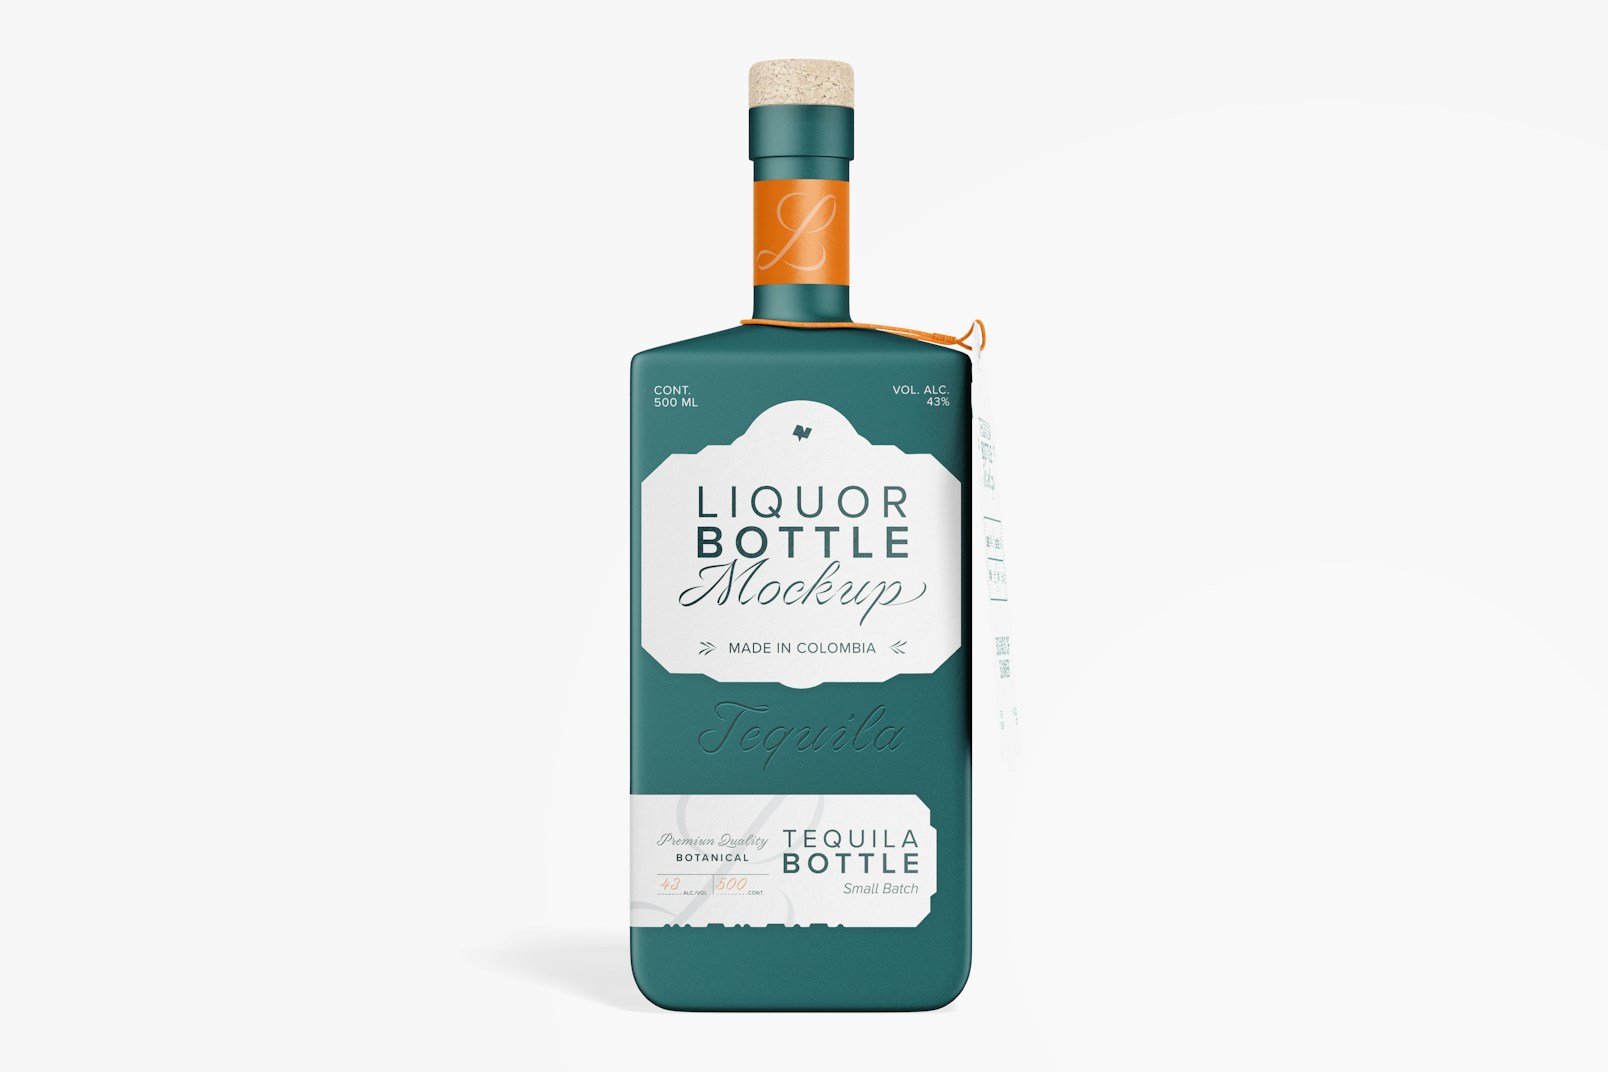 Tequila Bottle Mockup, Front View